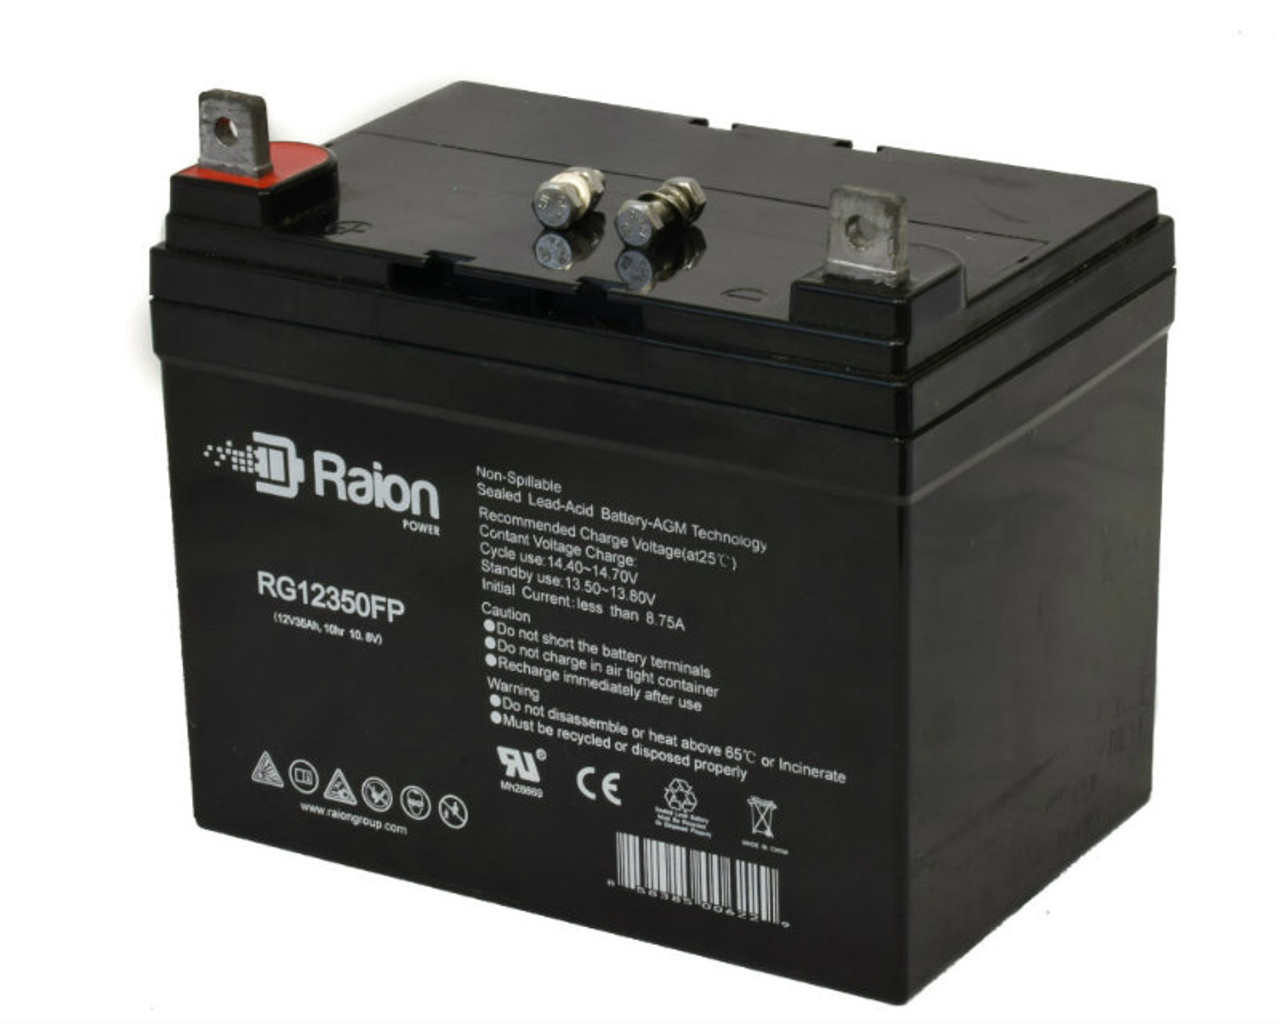 Raion Power Replacement 12V 35Ah RG12350FP Mobility Scooter Battery for Karma Medical Products KS-646